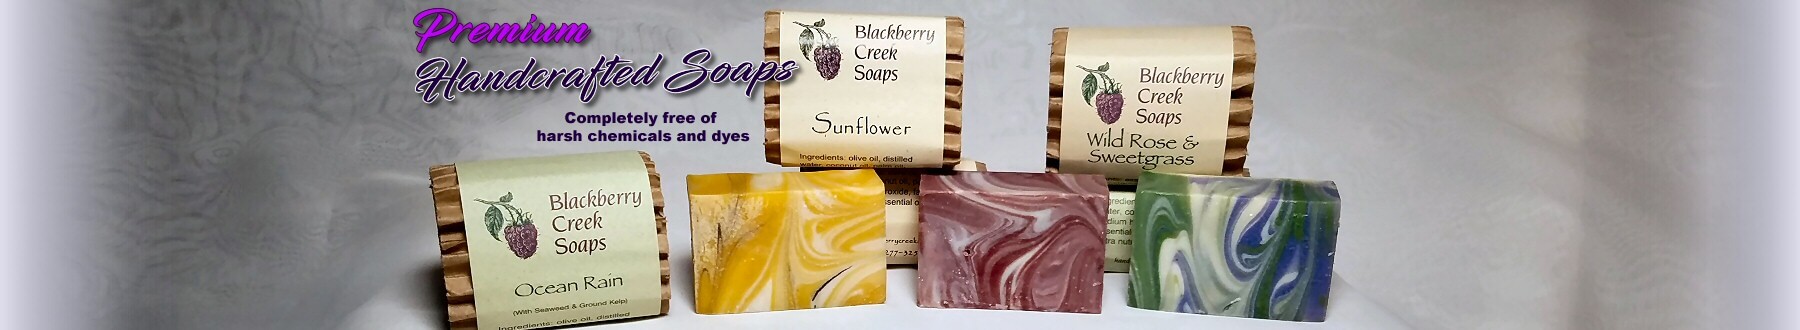 Premium Handcrafted Soaps - Completely free of harsh chemicals and dyes